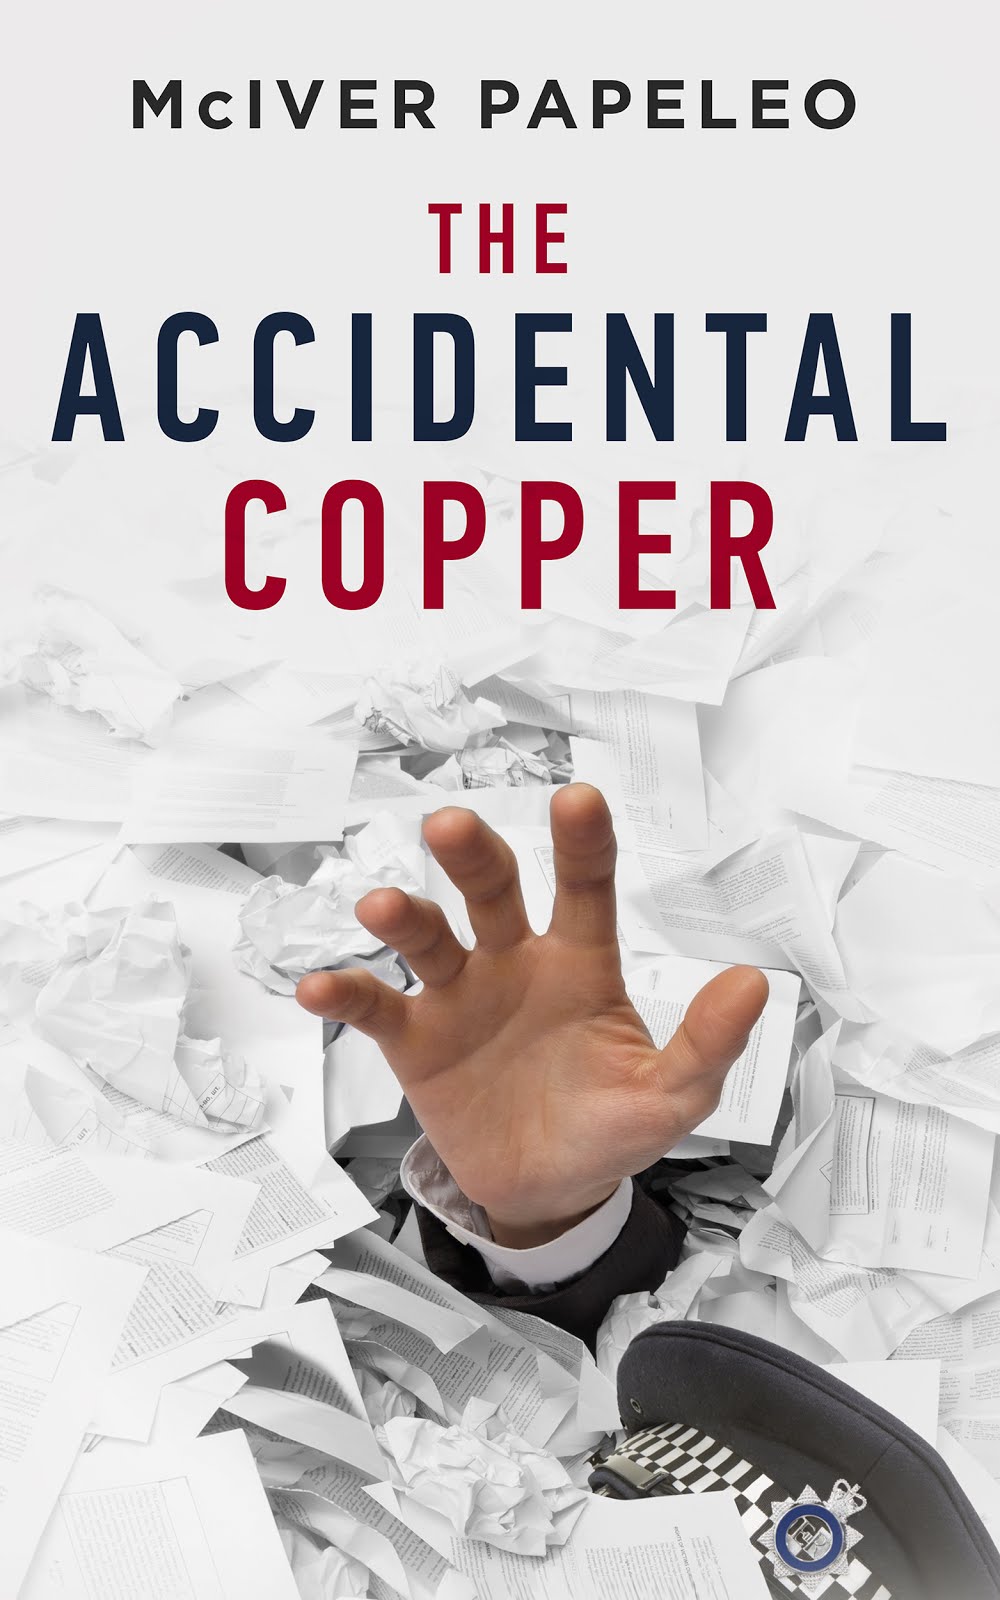 Order 'The Accidental Copper':